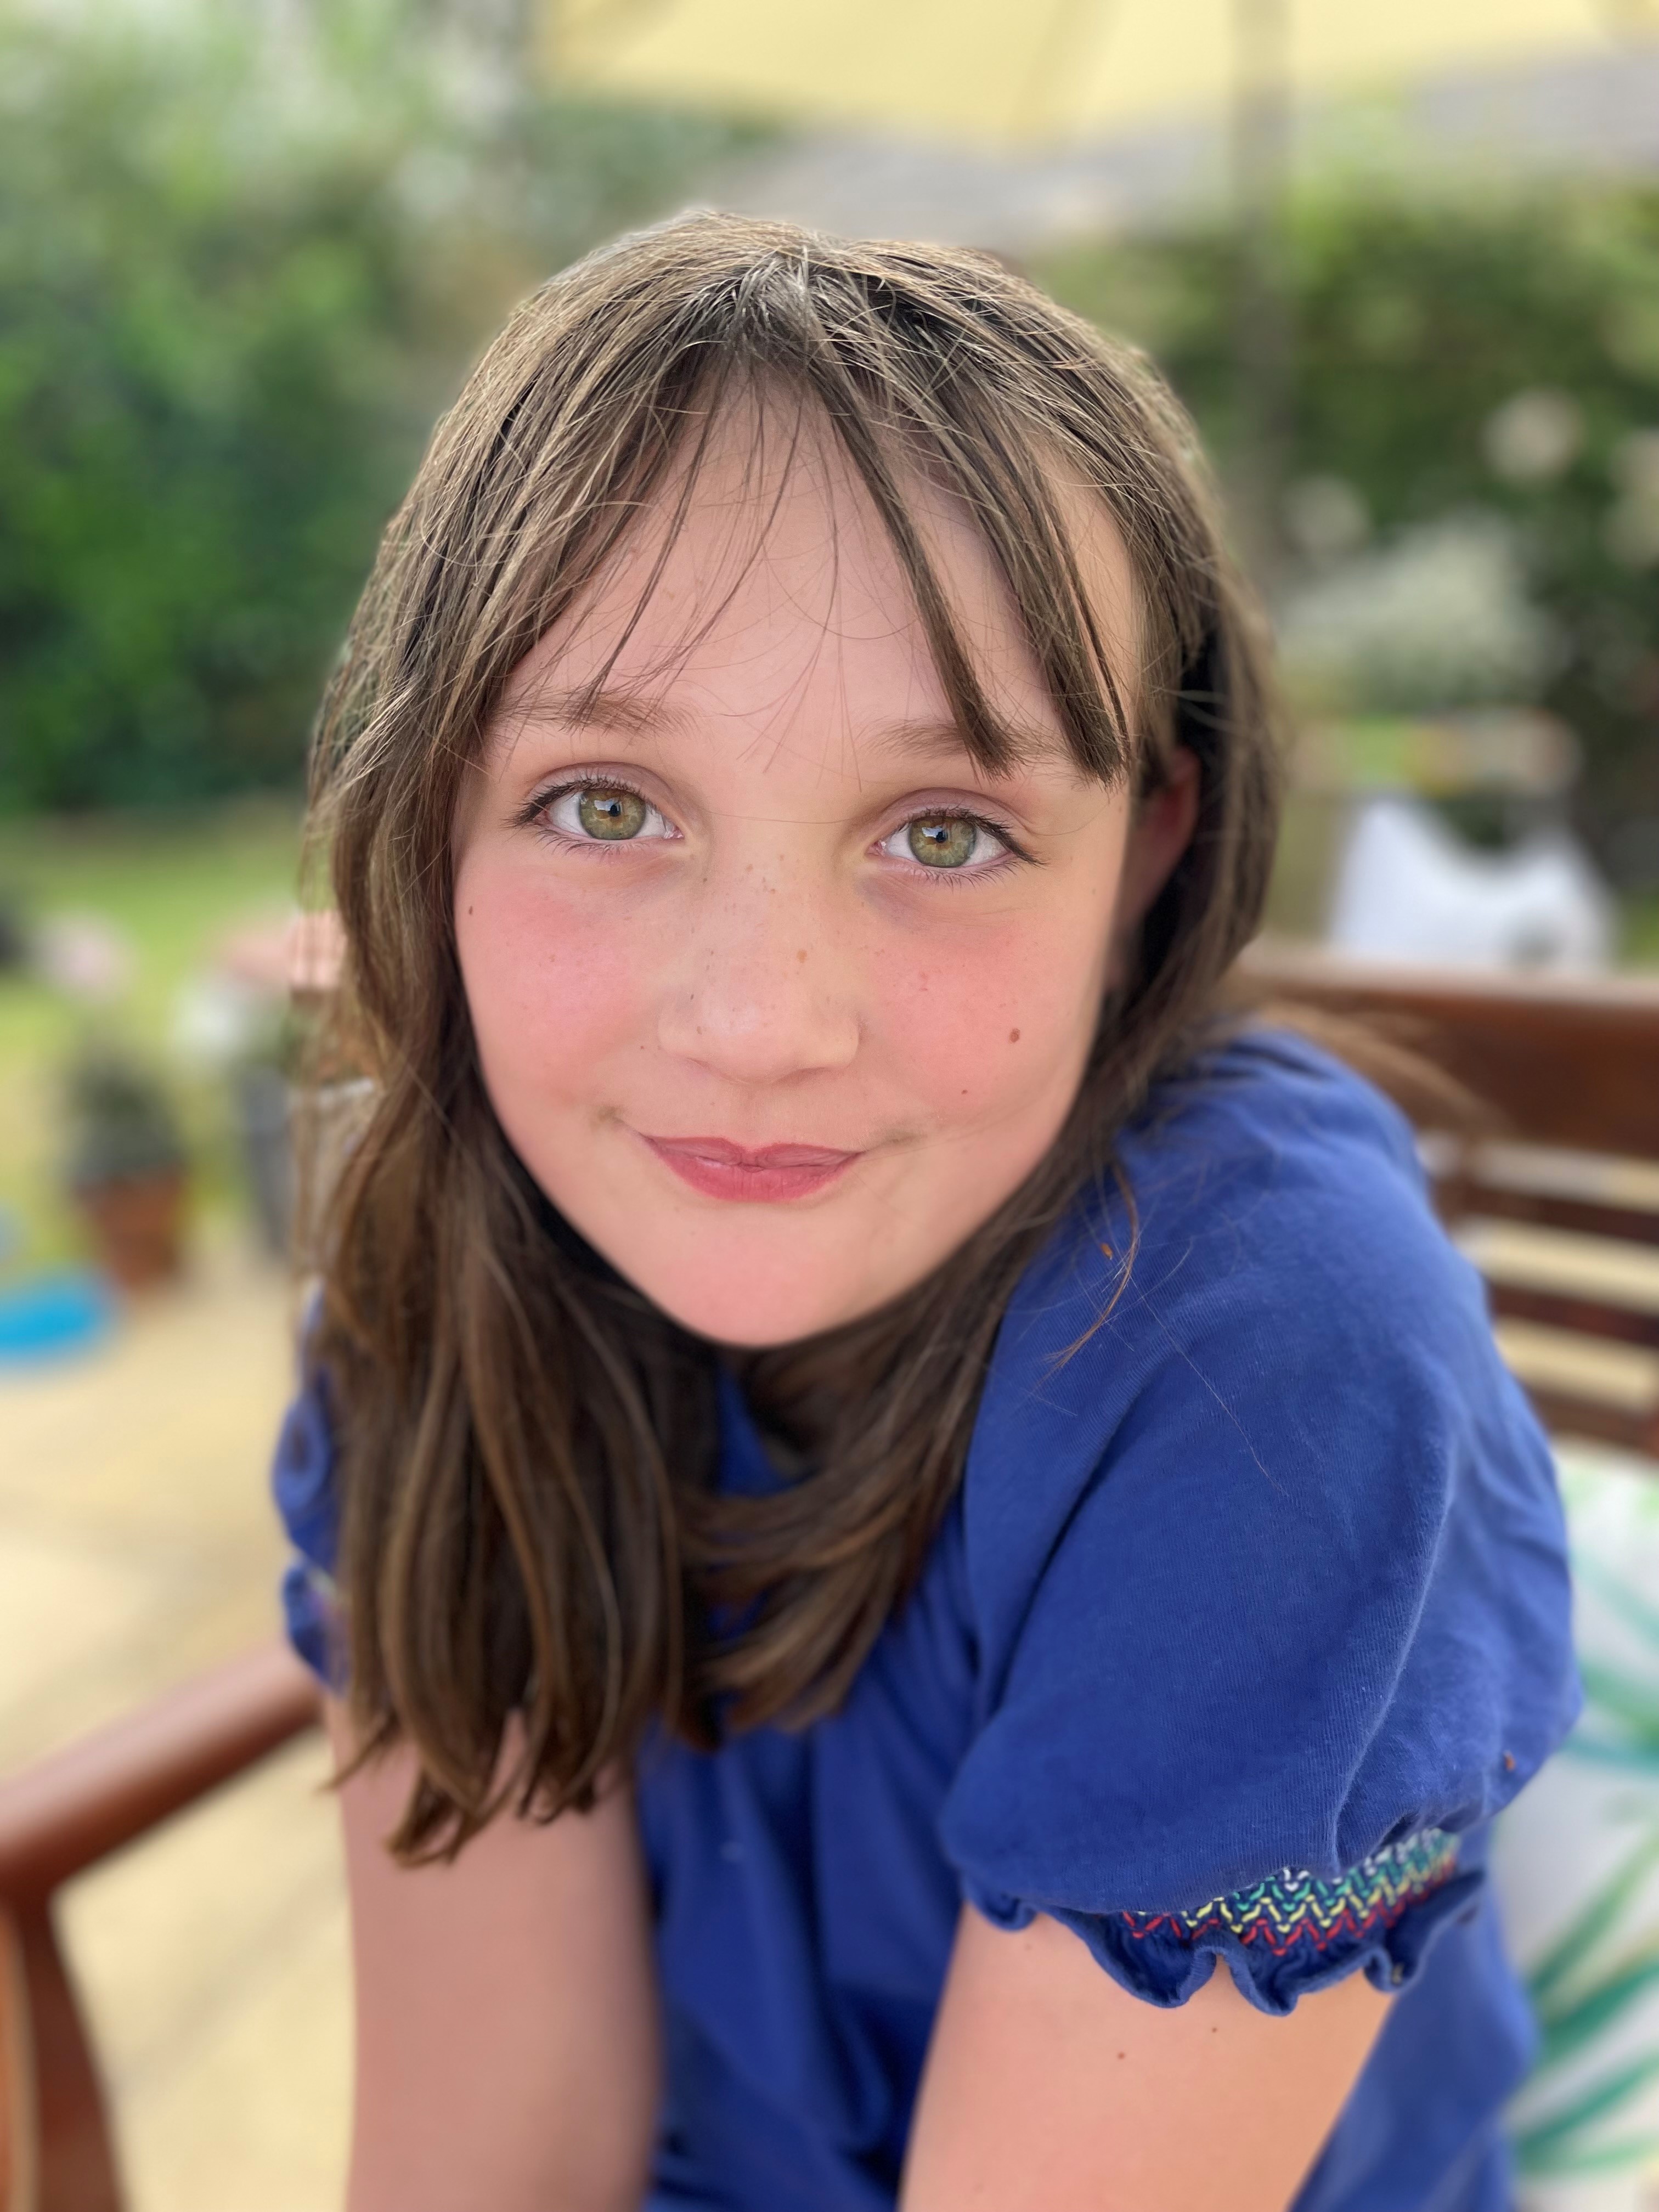 Bea, 10, was diagnosed with the rare heart condition arrhythmogenic cardiomyopathy (ACM) three years ago. She is now involved in a trial at Great Ormond Street Hospital which is using a simple cheek swap to detect changes in cells that could indicate a flare-up in the heart.